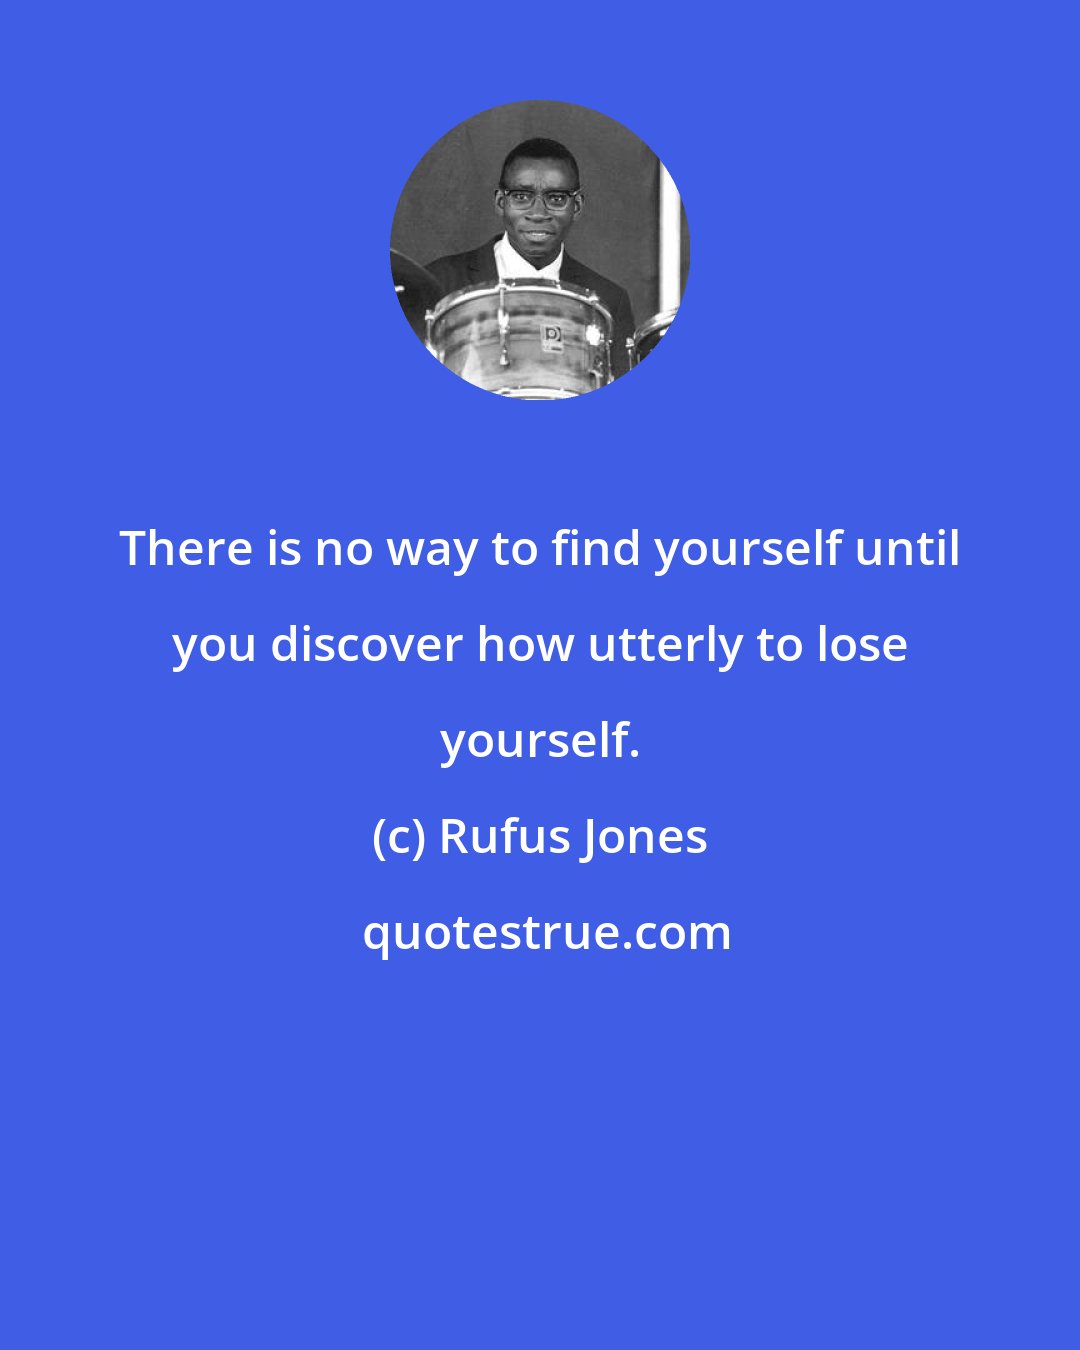 Rufus Jones: There is no way to find yourself until you discover how utterly to lose yourself.